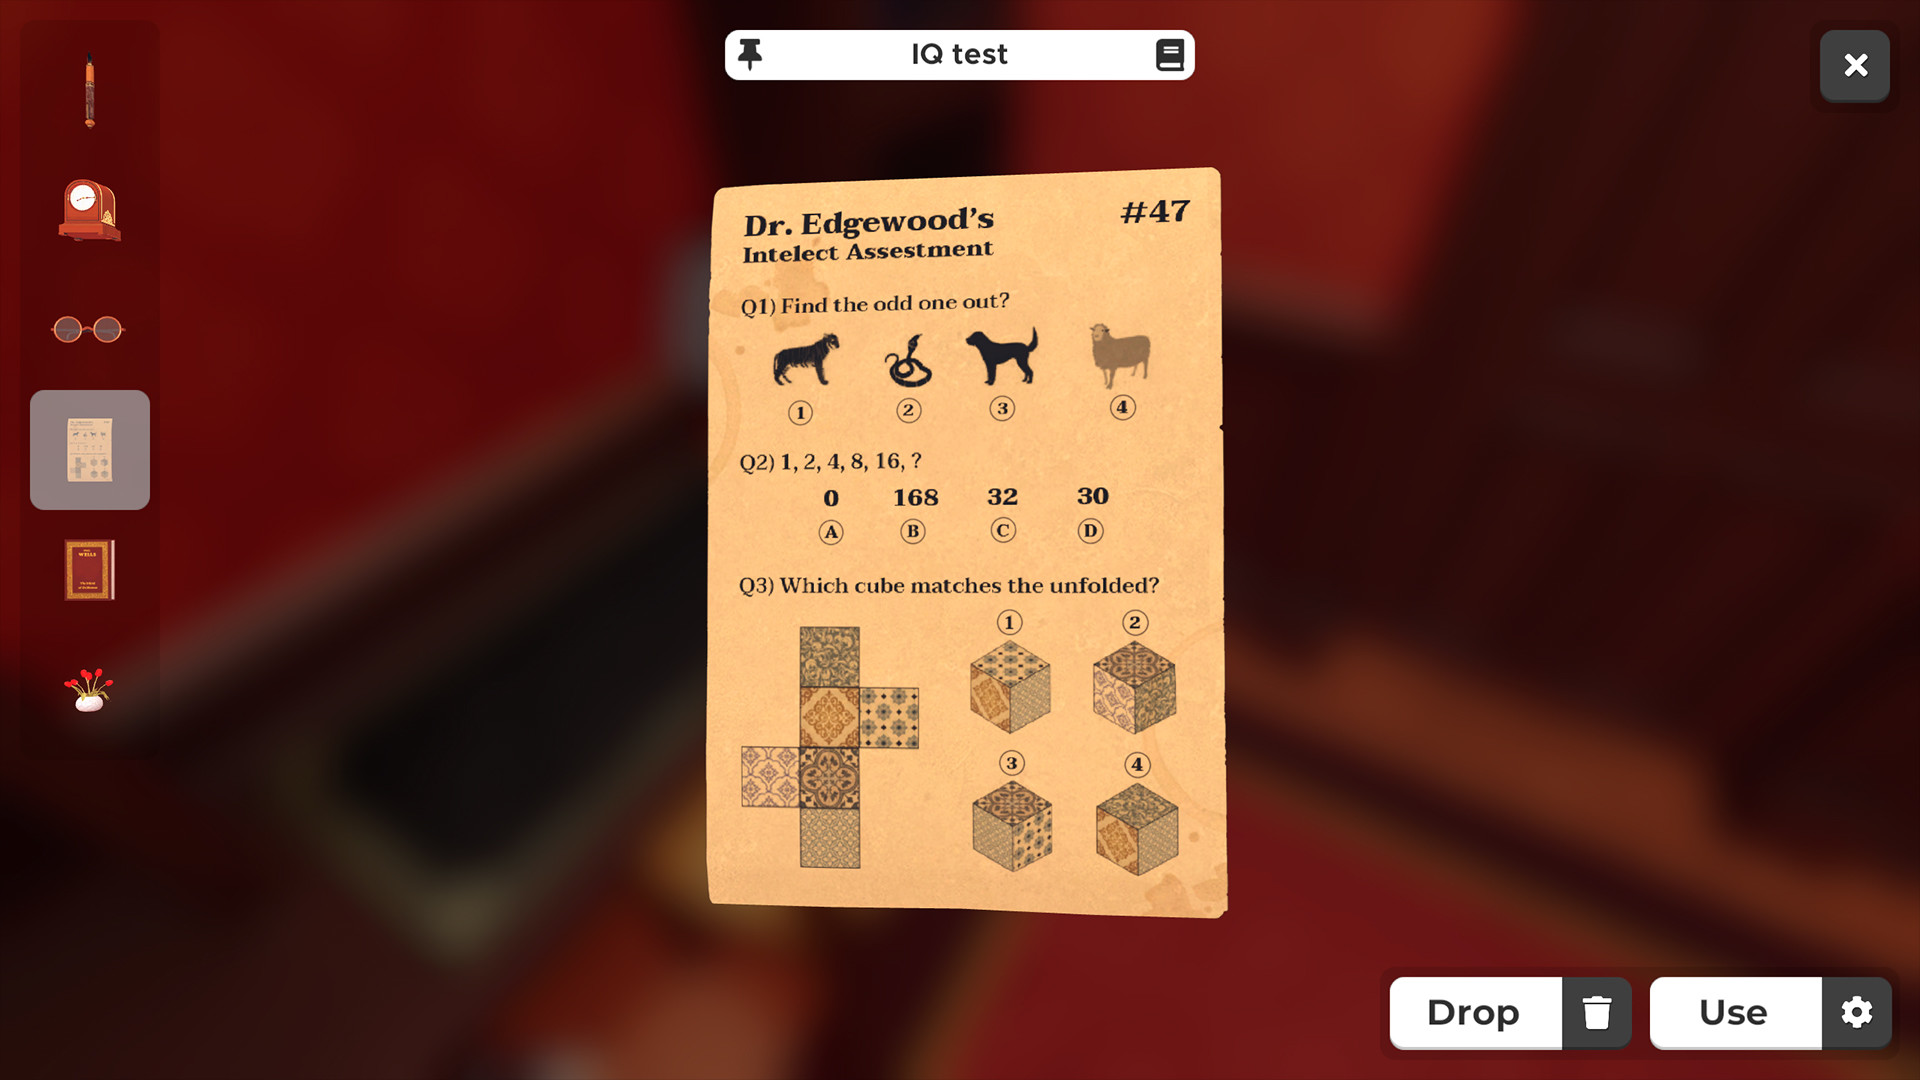 Escape The Backrooms - Level 0 v1.0 MOD APK -  - Android &  iOS MODs, Mobile Games & Apps